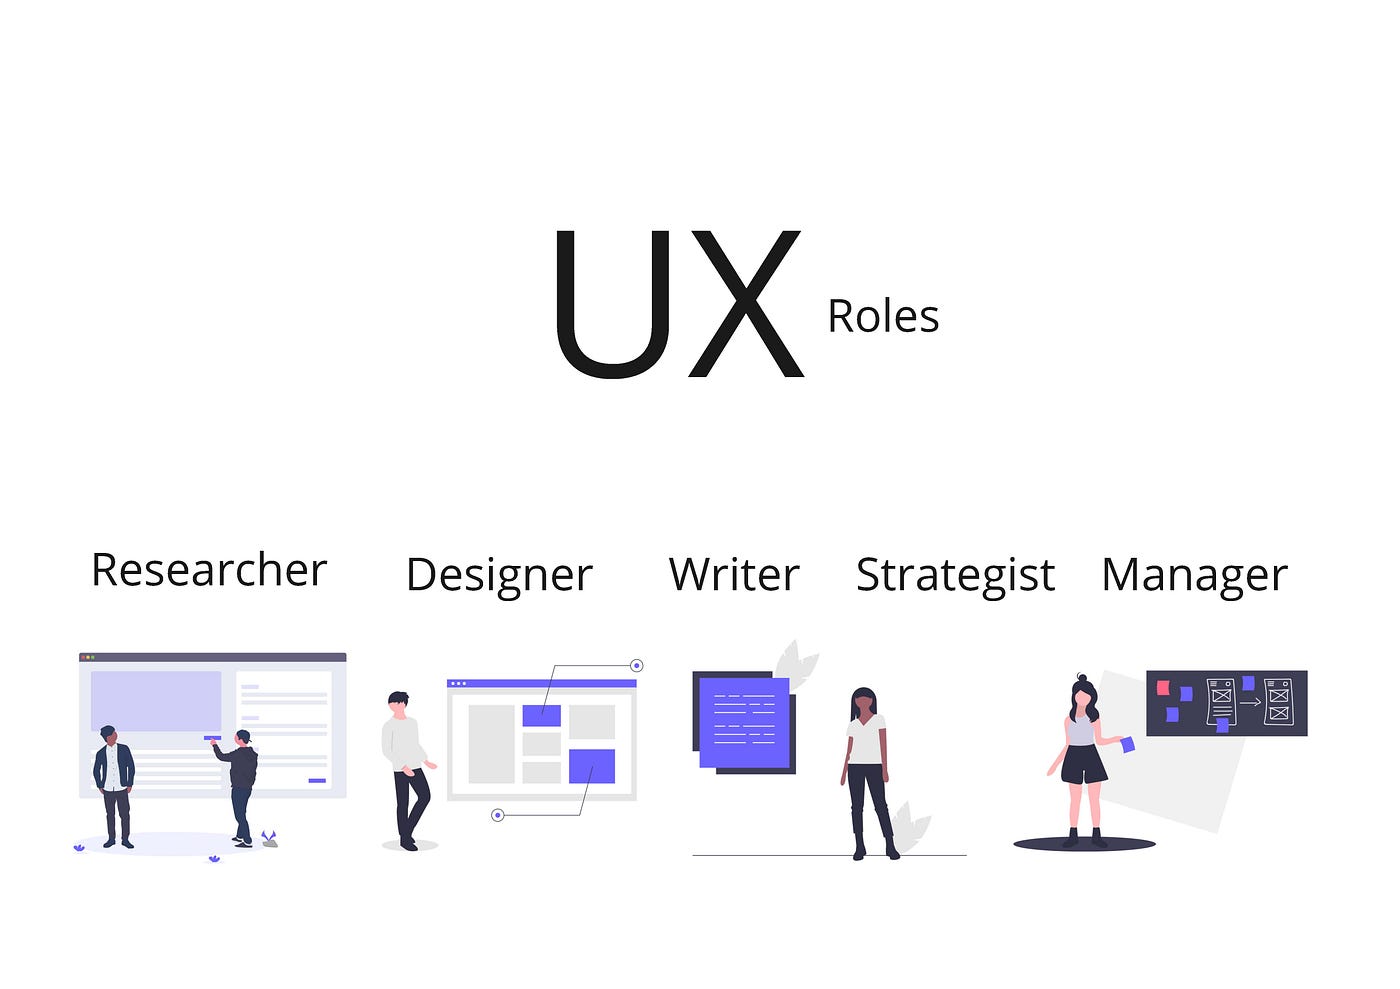 Which of the million UX roles suits you best? A personality type